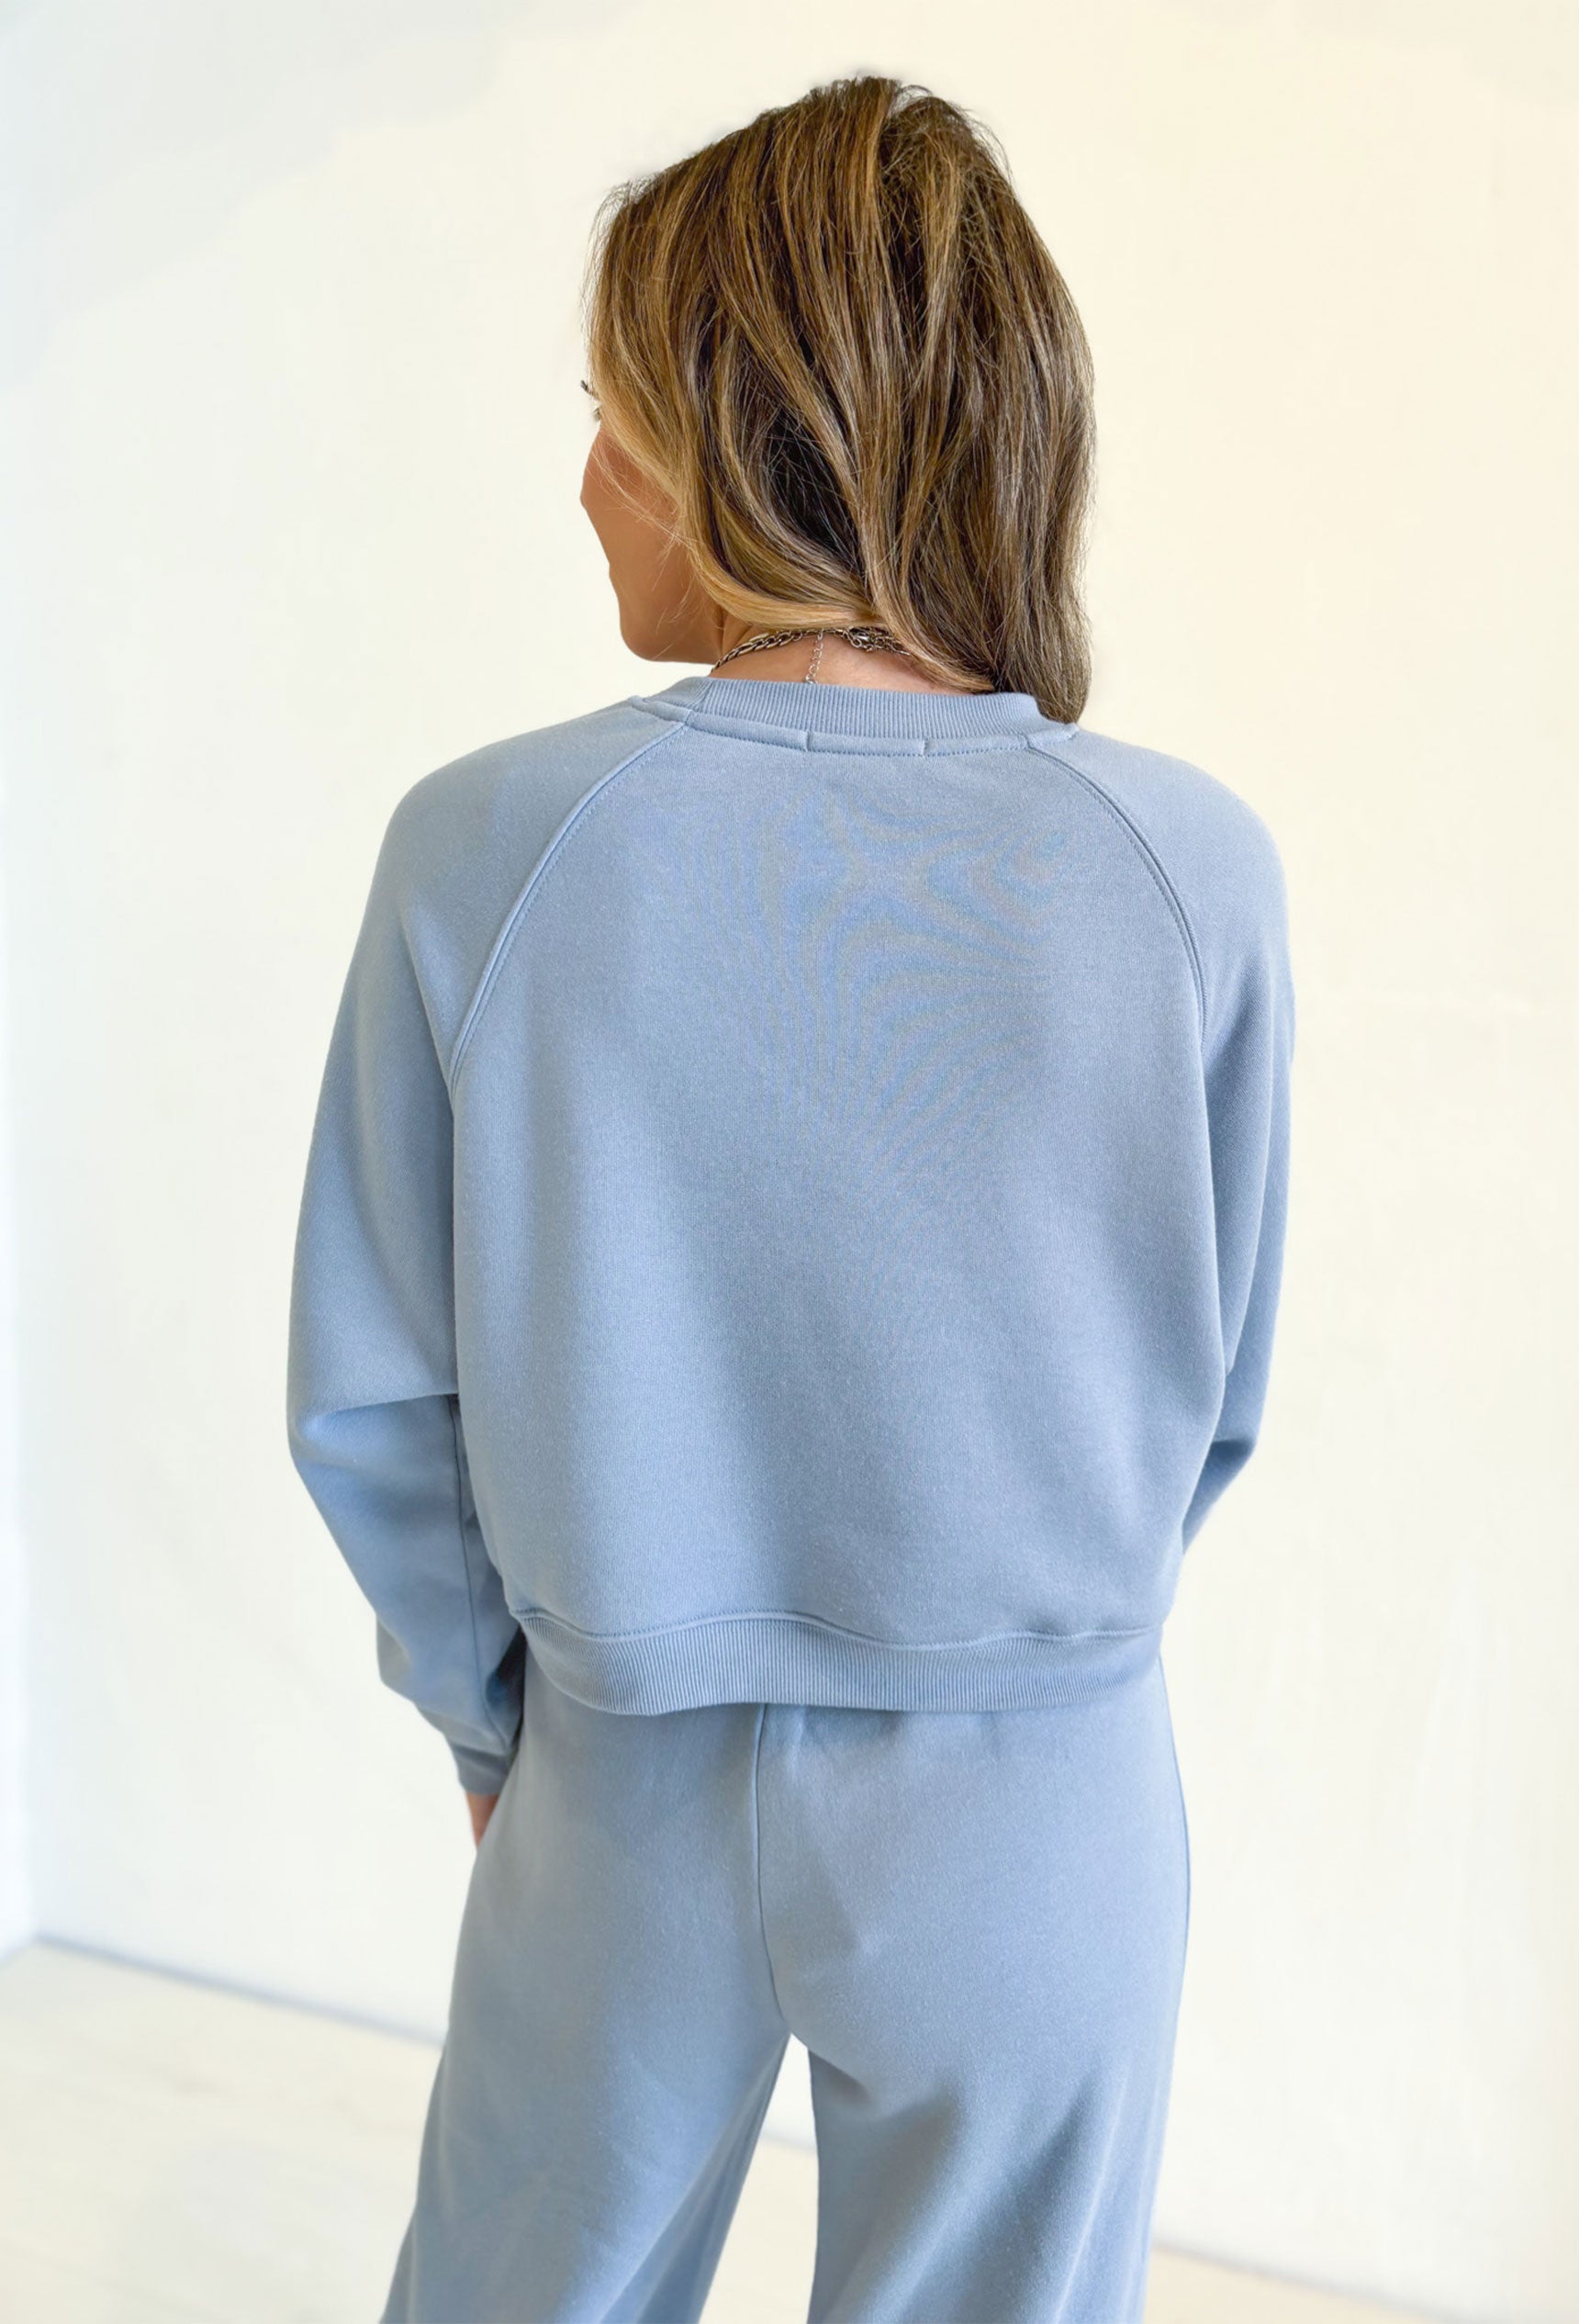 Z SUPPLY Crop Out Sweatshirt, light blue cropped crew neck